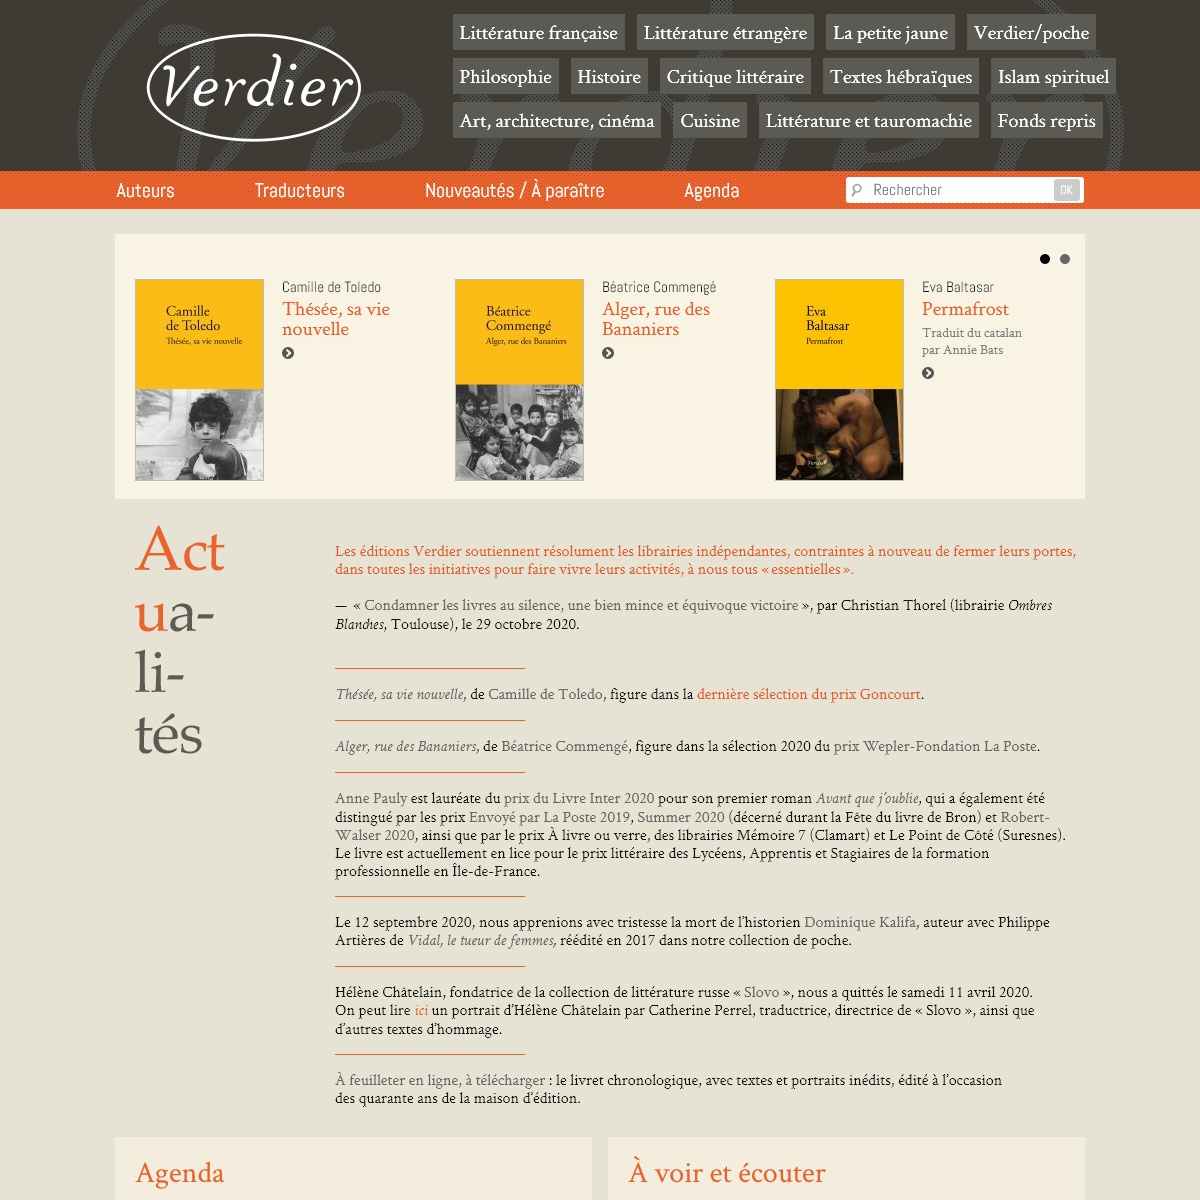 A complete backup of editions-verdier.fr